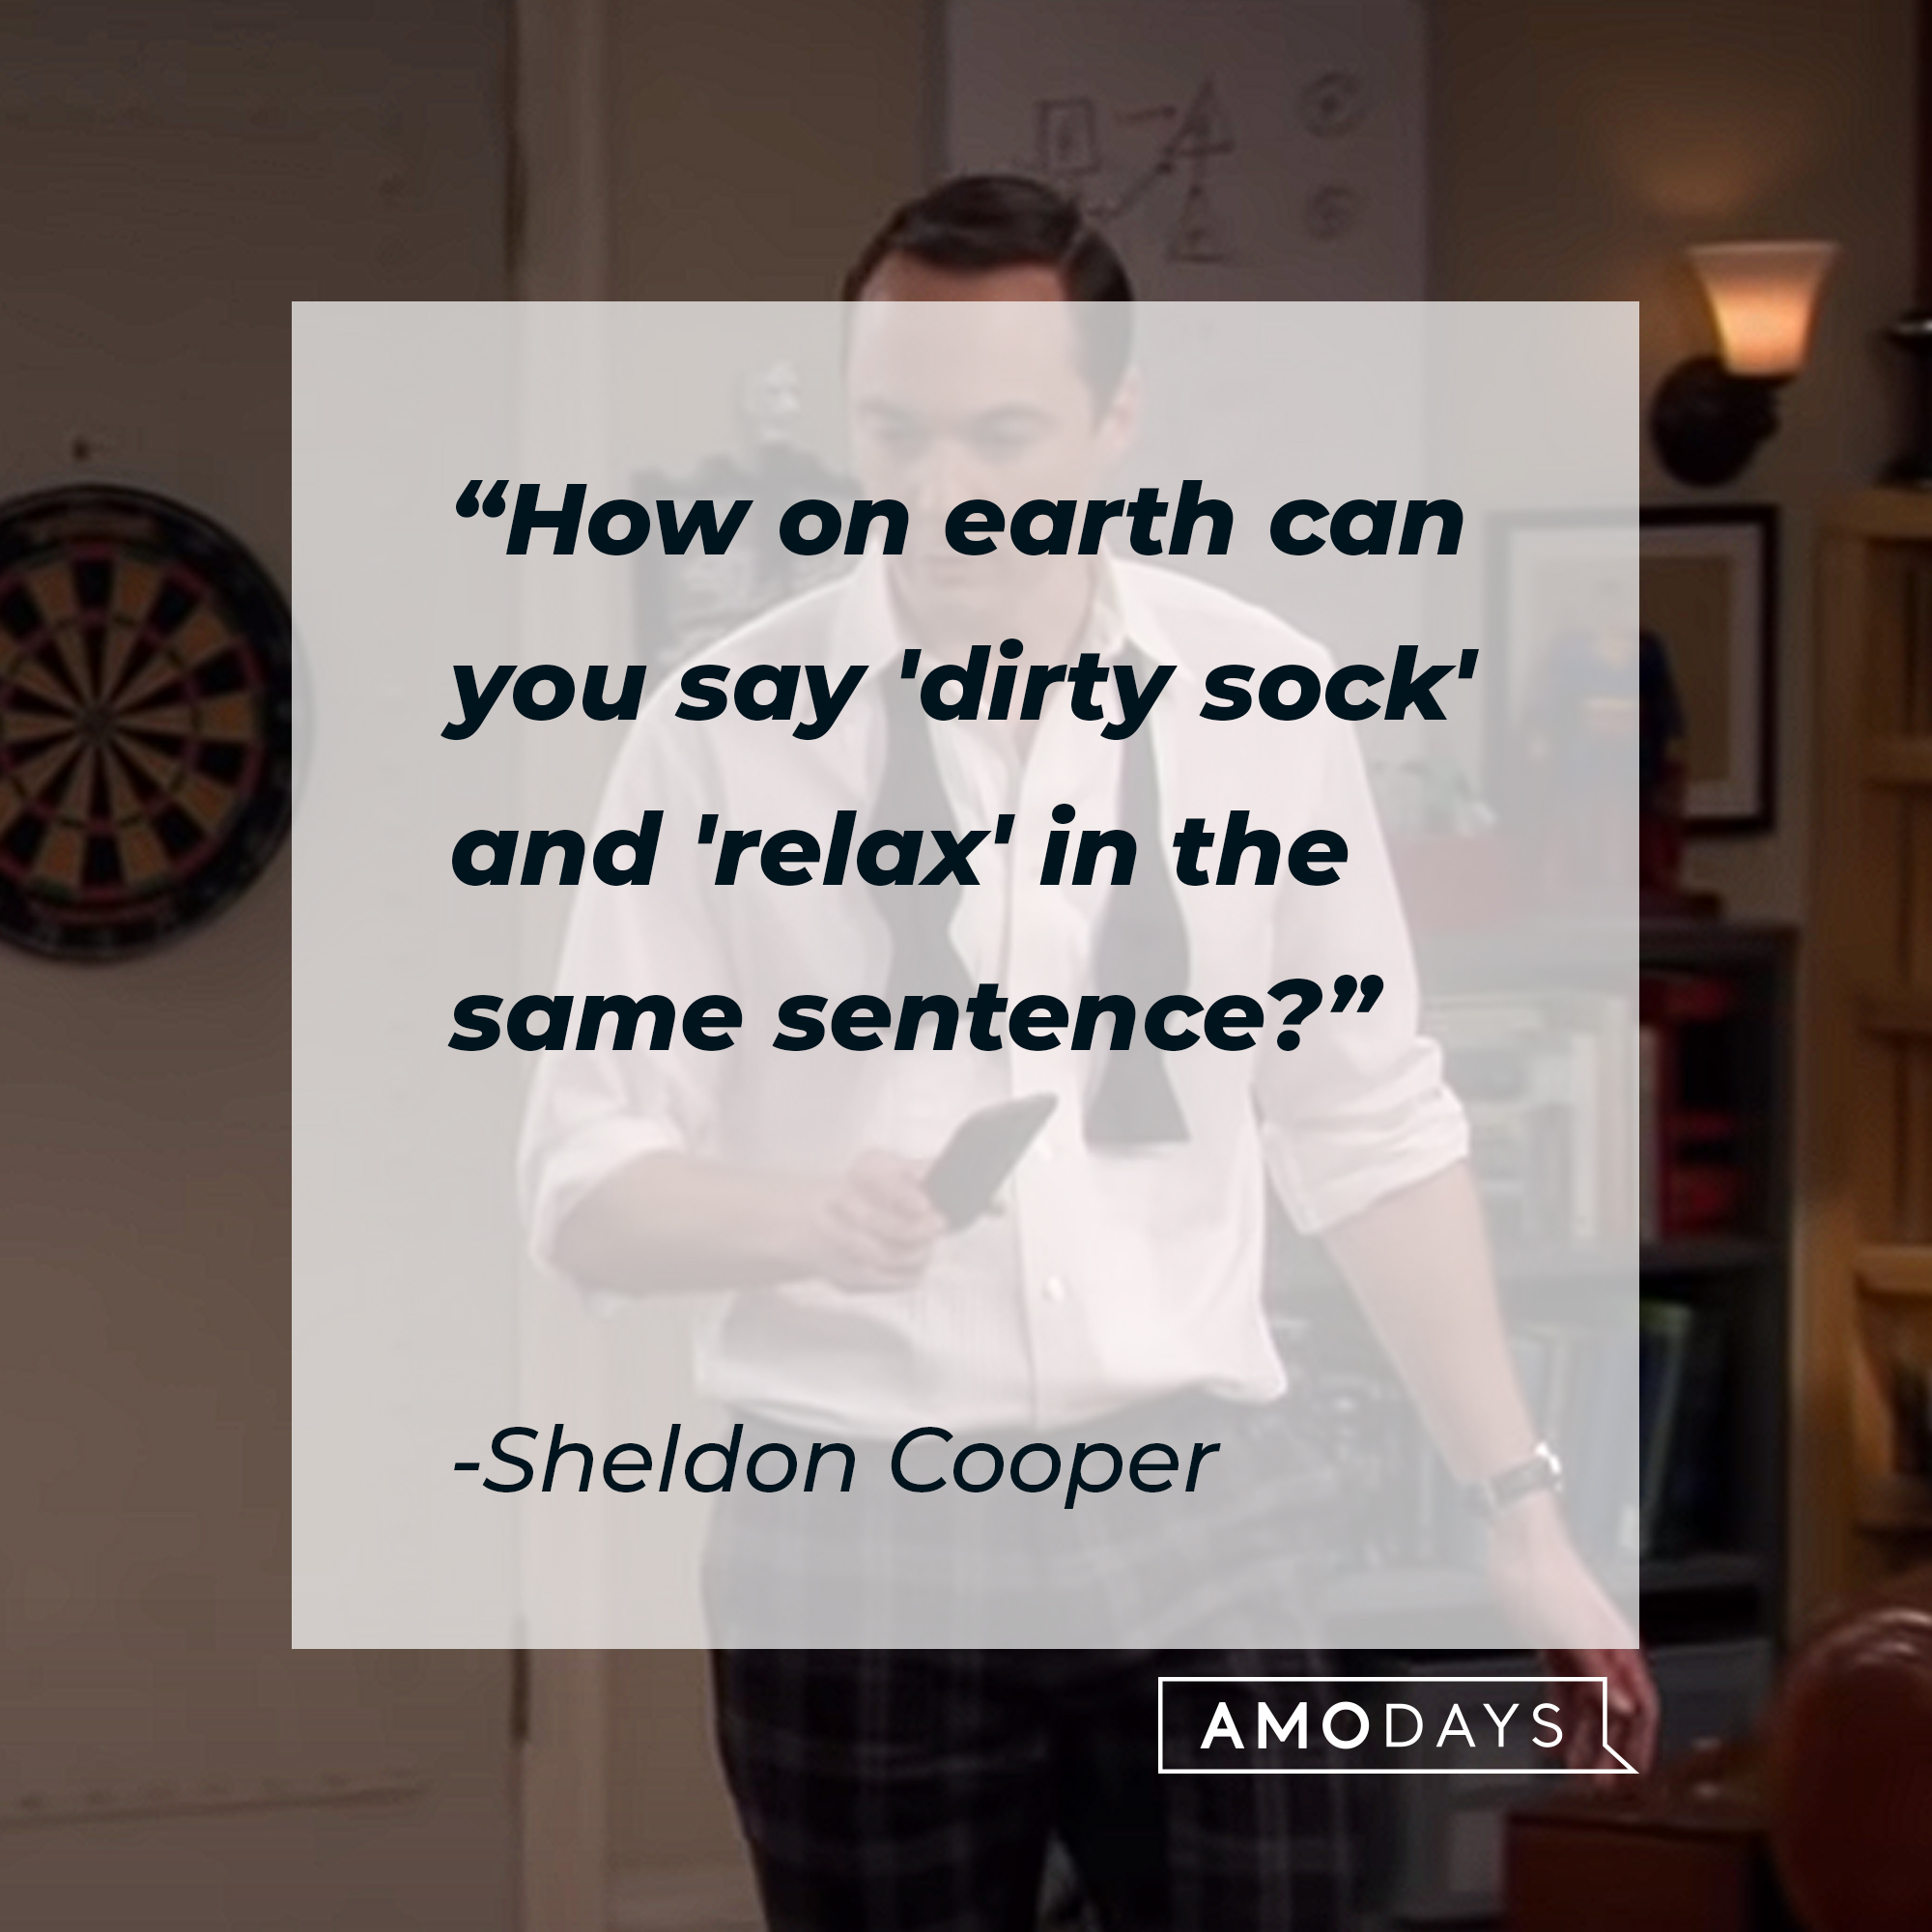 Sheldon Cooper's quote: "How on earth can you say 'dirty sock' and 'relax' in the same sentence?" | Source: youtube.com/warnerbrostv